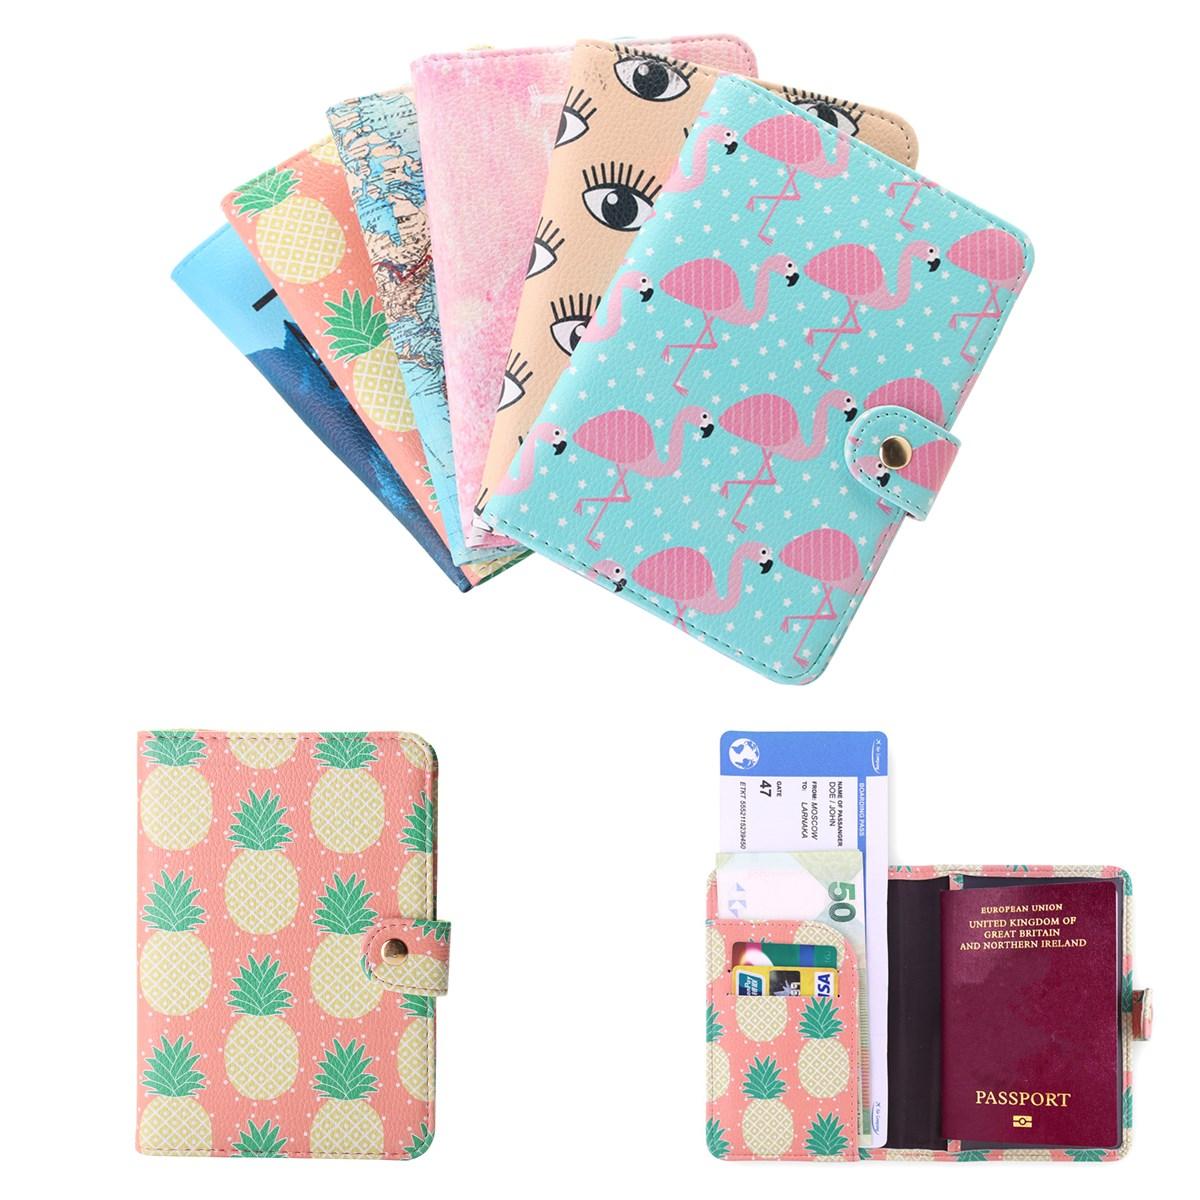 Travel PU Leather Passport Organizer Holder Card Case Protector Cover Wallet